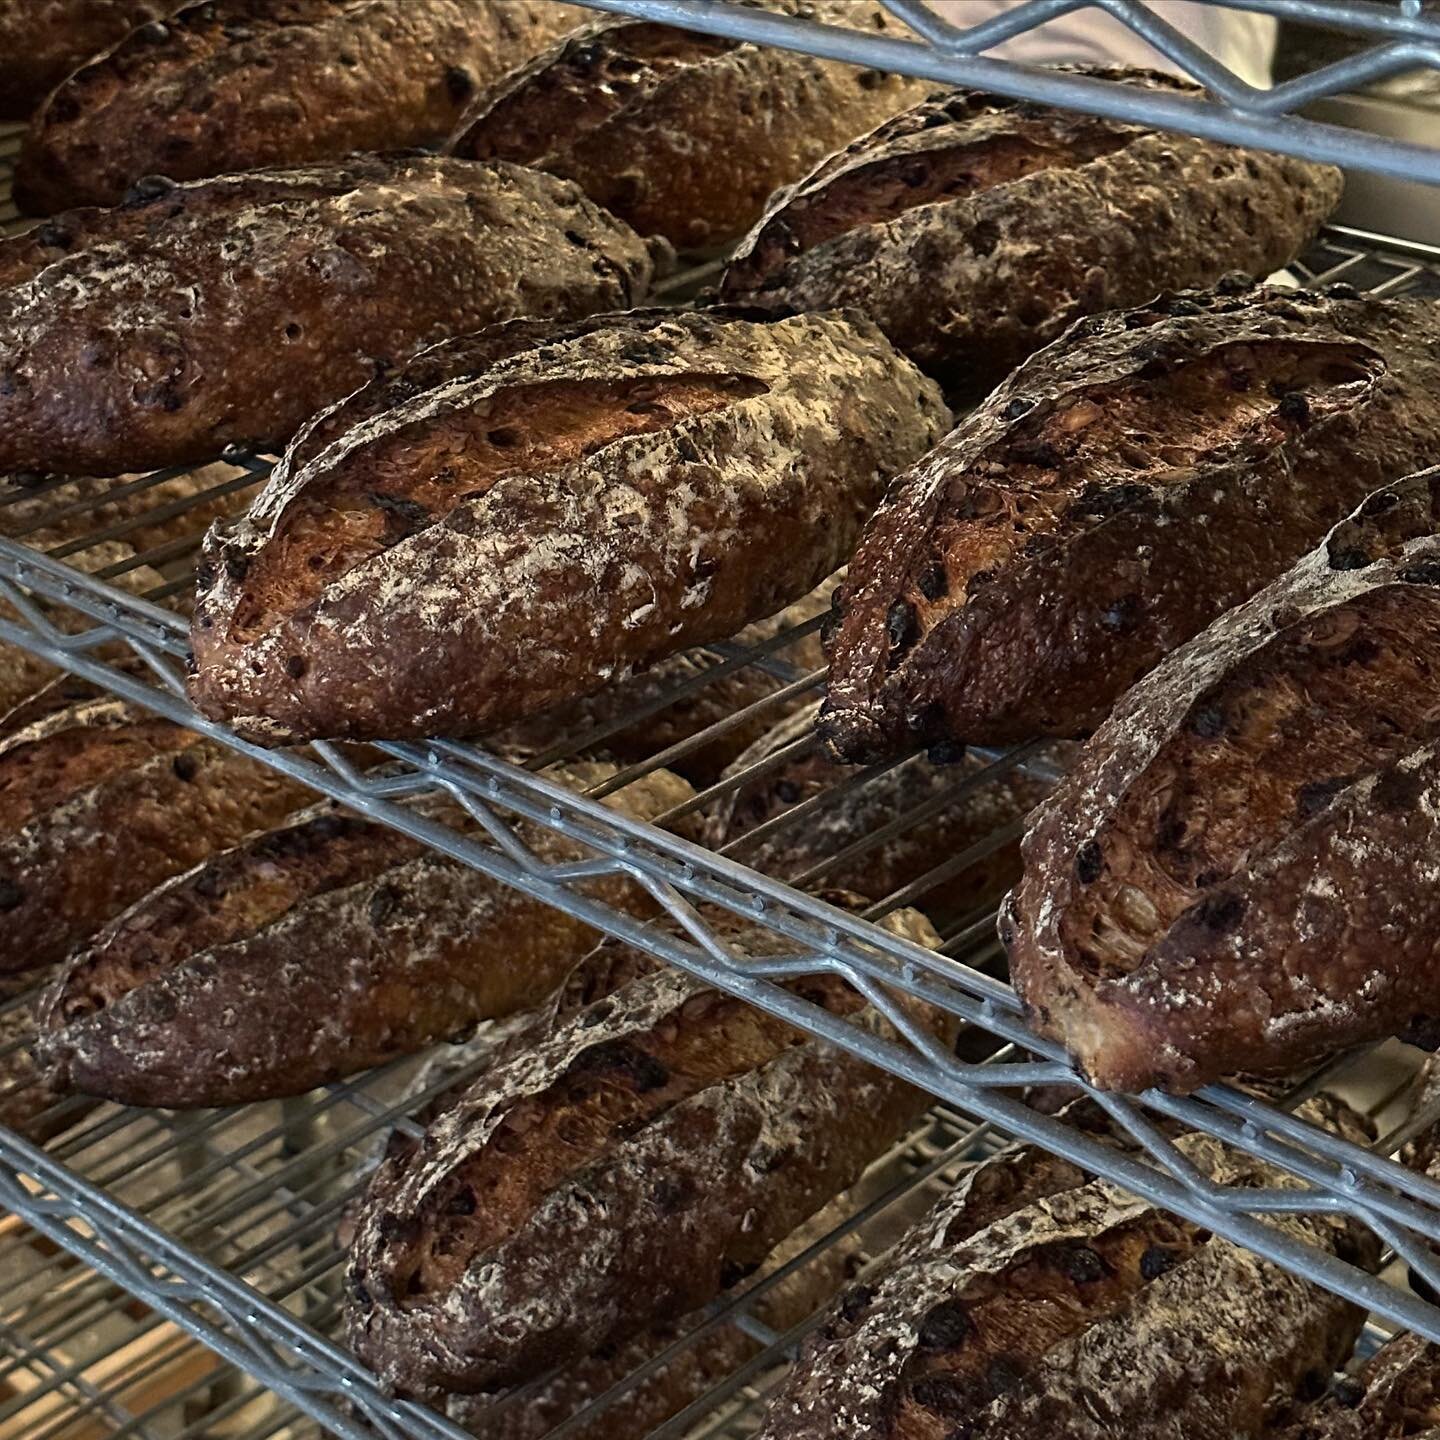 Raisin &amp; Pecan is back ❤️ Saturday&rsquo;s, we will be making raisin &amp; pecan longs and rolls - we are so excited to see you all again this Saturday at the bread shop !